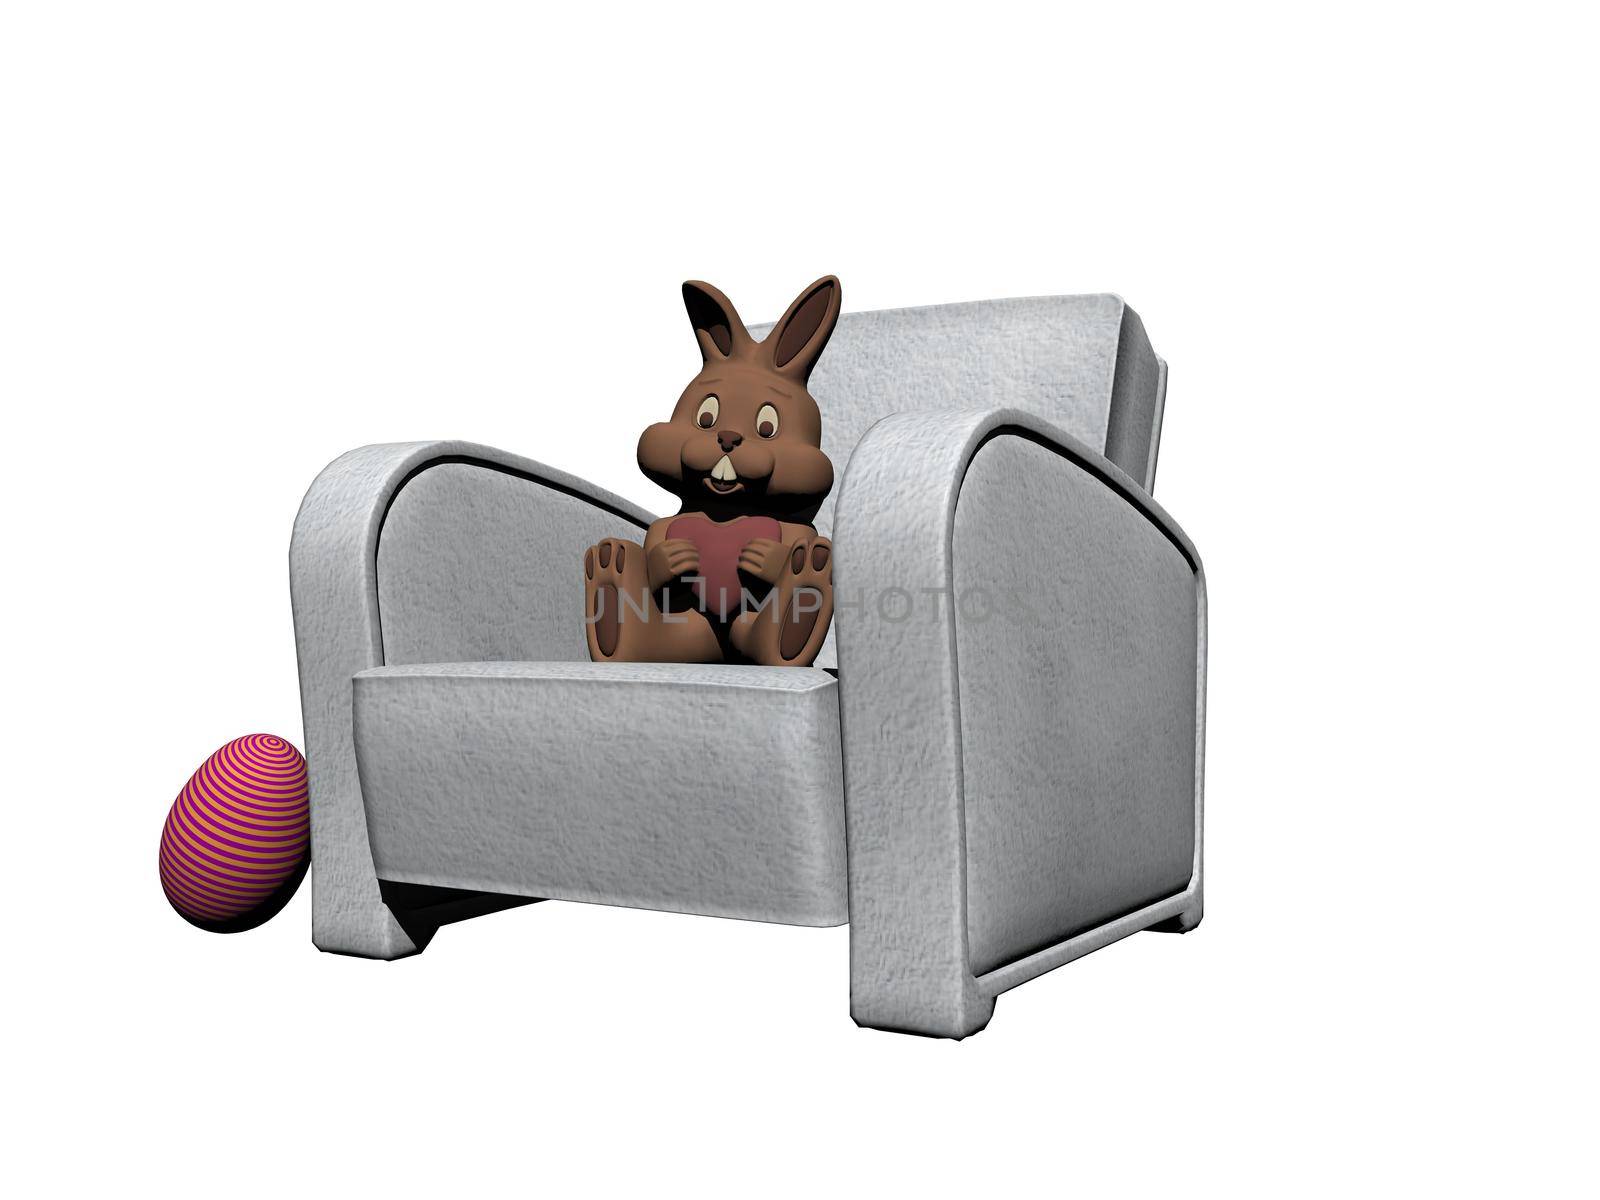 Bunny hugging an Easter egg - 3d rendering by mariephotos